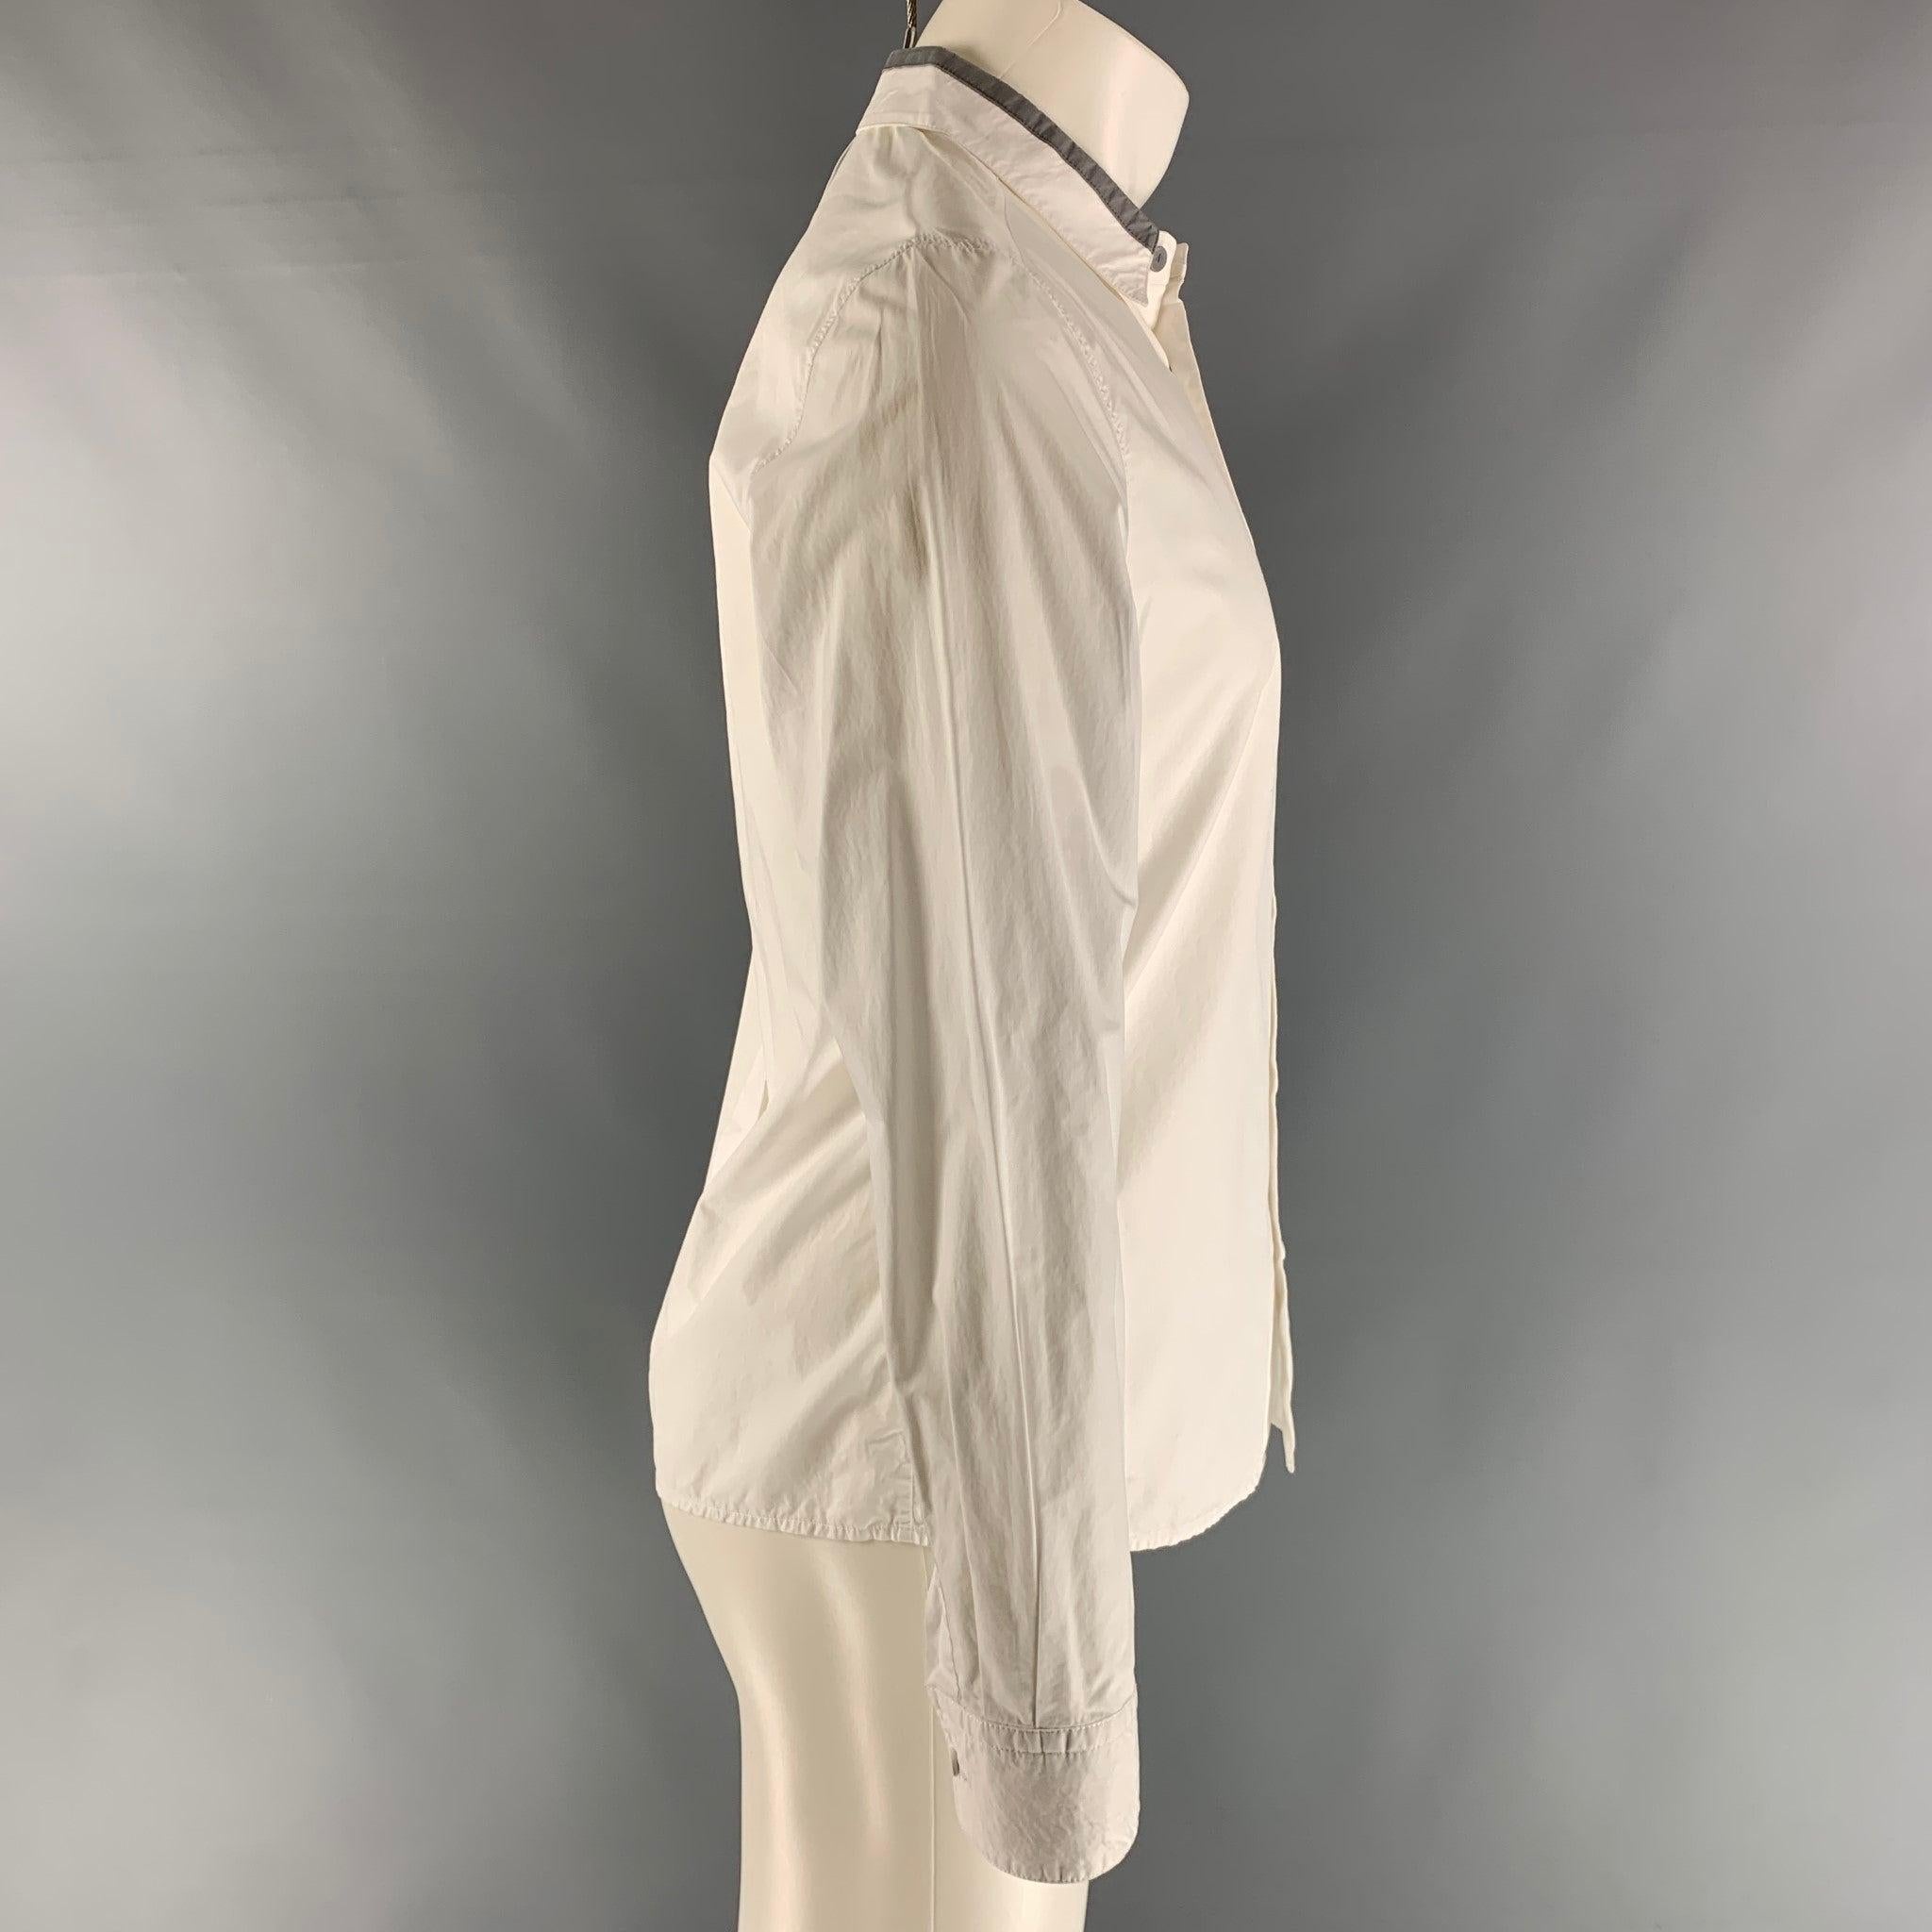 3.1 PHILLIP LIM long sleeve shirt comes in a white cotton featuring a button up closure, one button round cuff, and a straight collar. Excellent Pre-Owned Condition. 

Marked:   S 

Measurements: 
 
Shoulder: 18 inches  Chest: 42 inches  Sleeve: 25